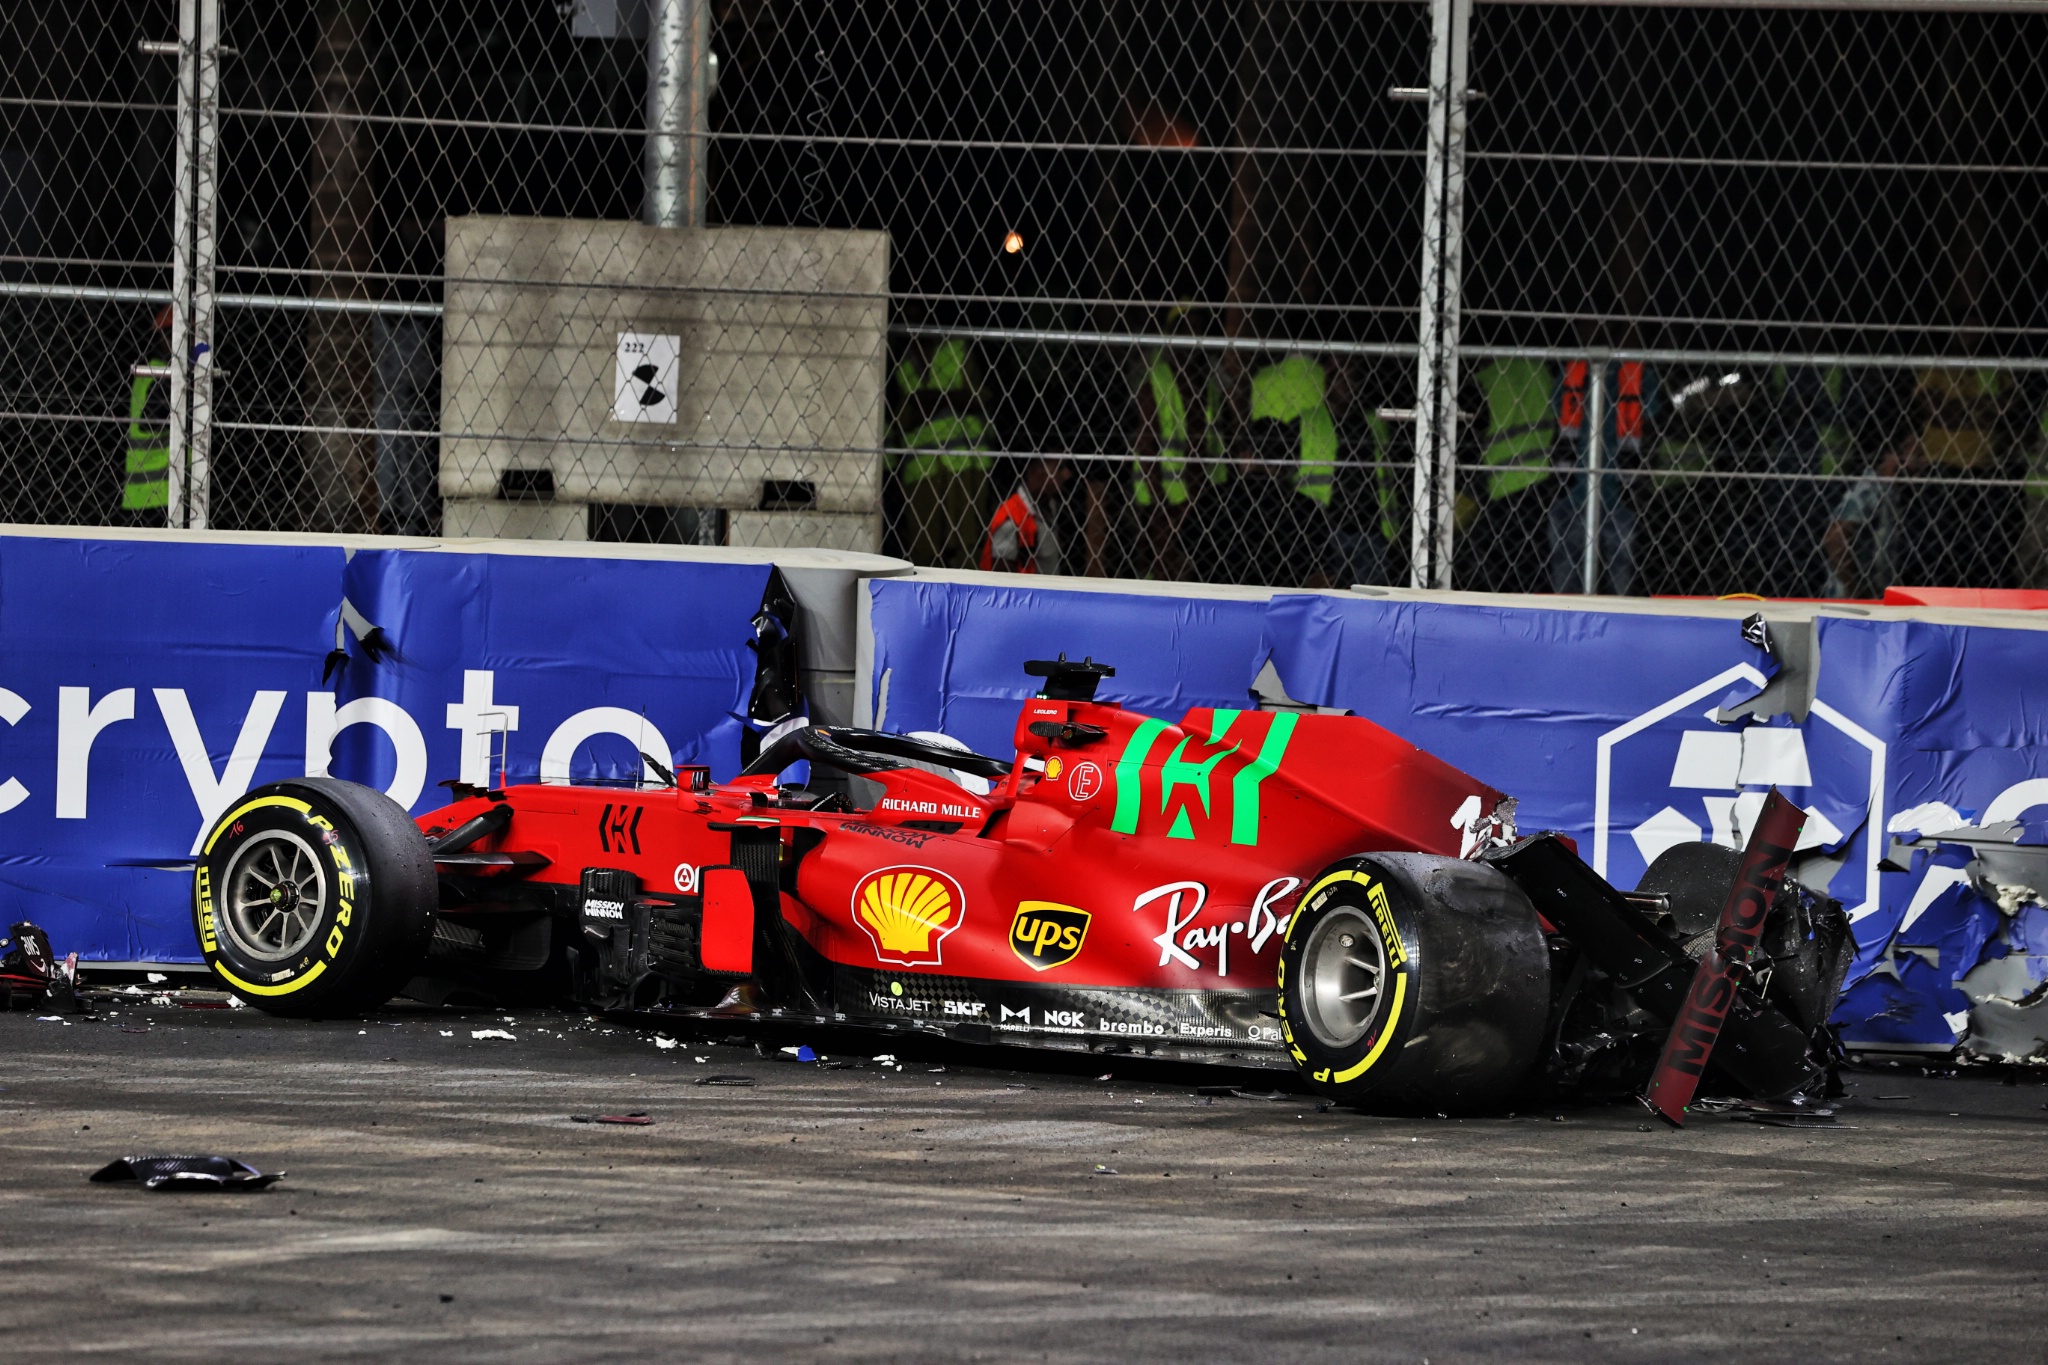 The damaged Ferrari SF-21 of Charles Leclerc (MON) after he crashed in the second practice session.